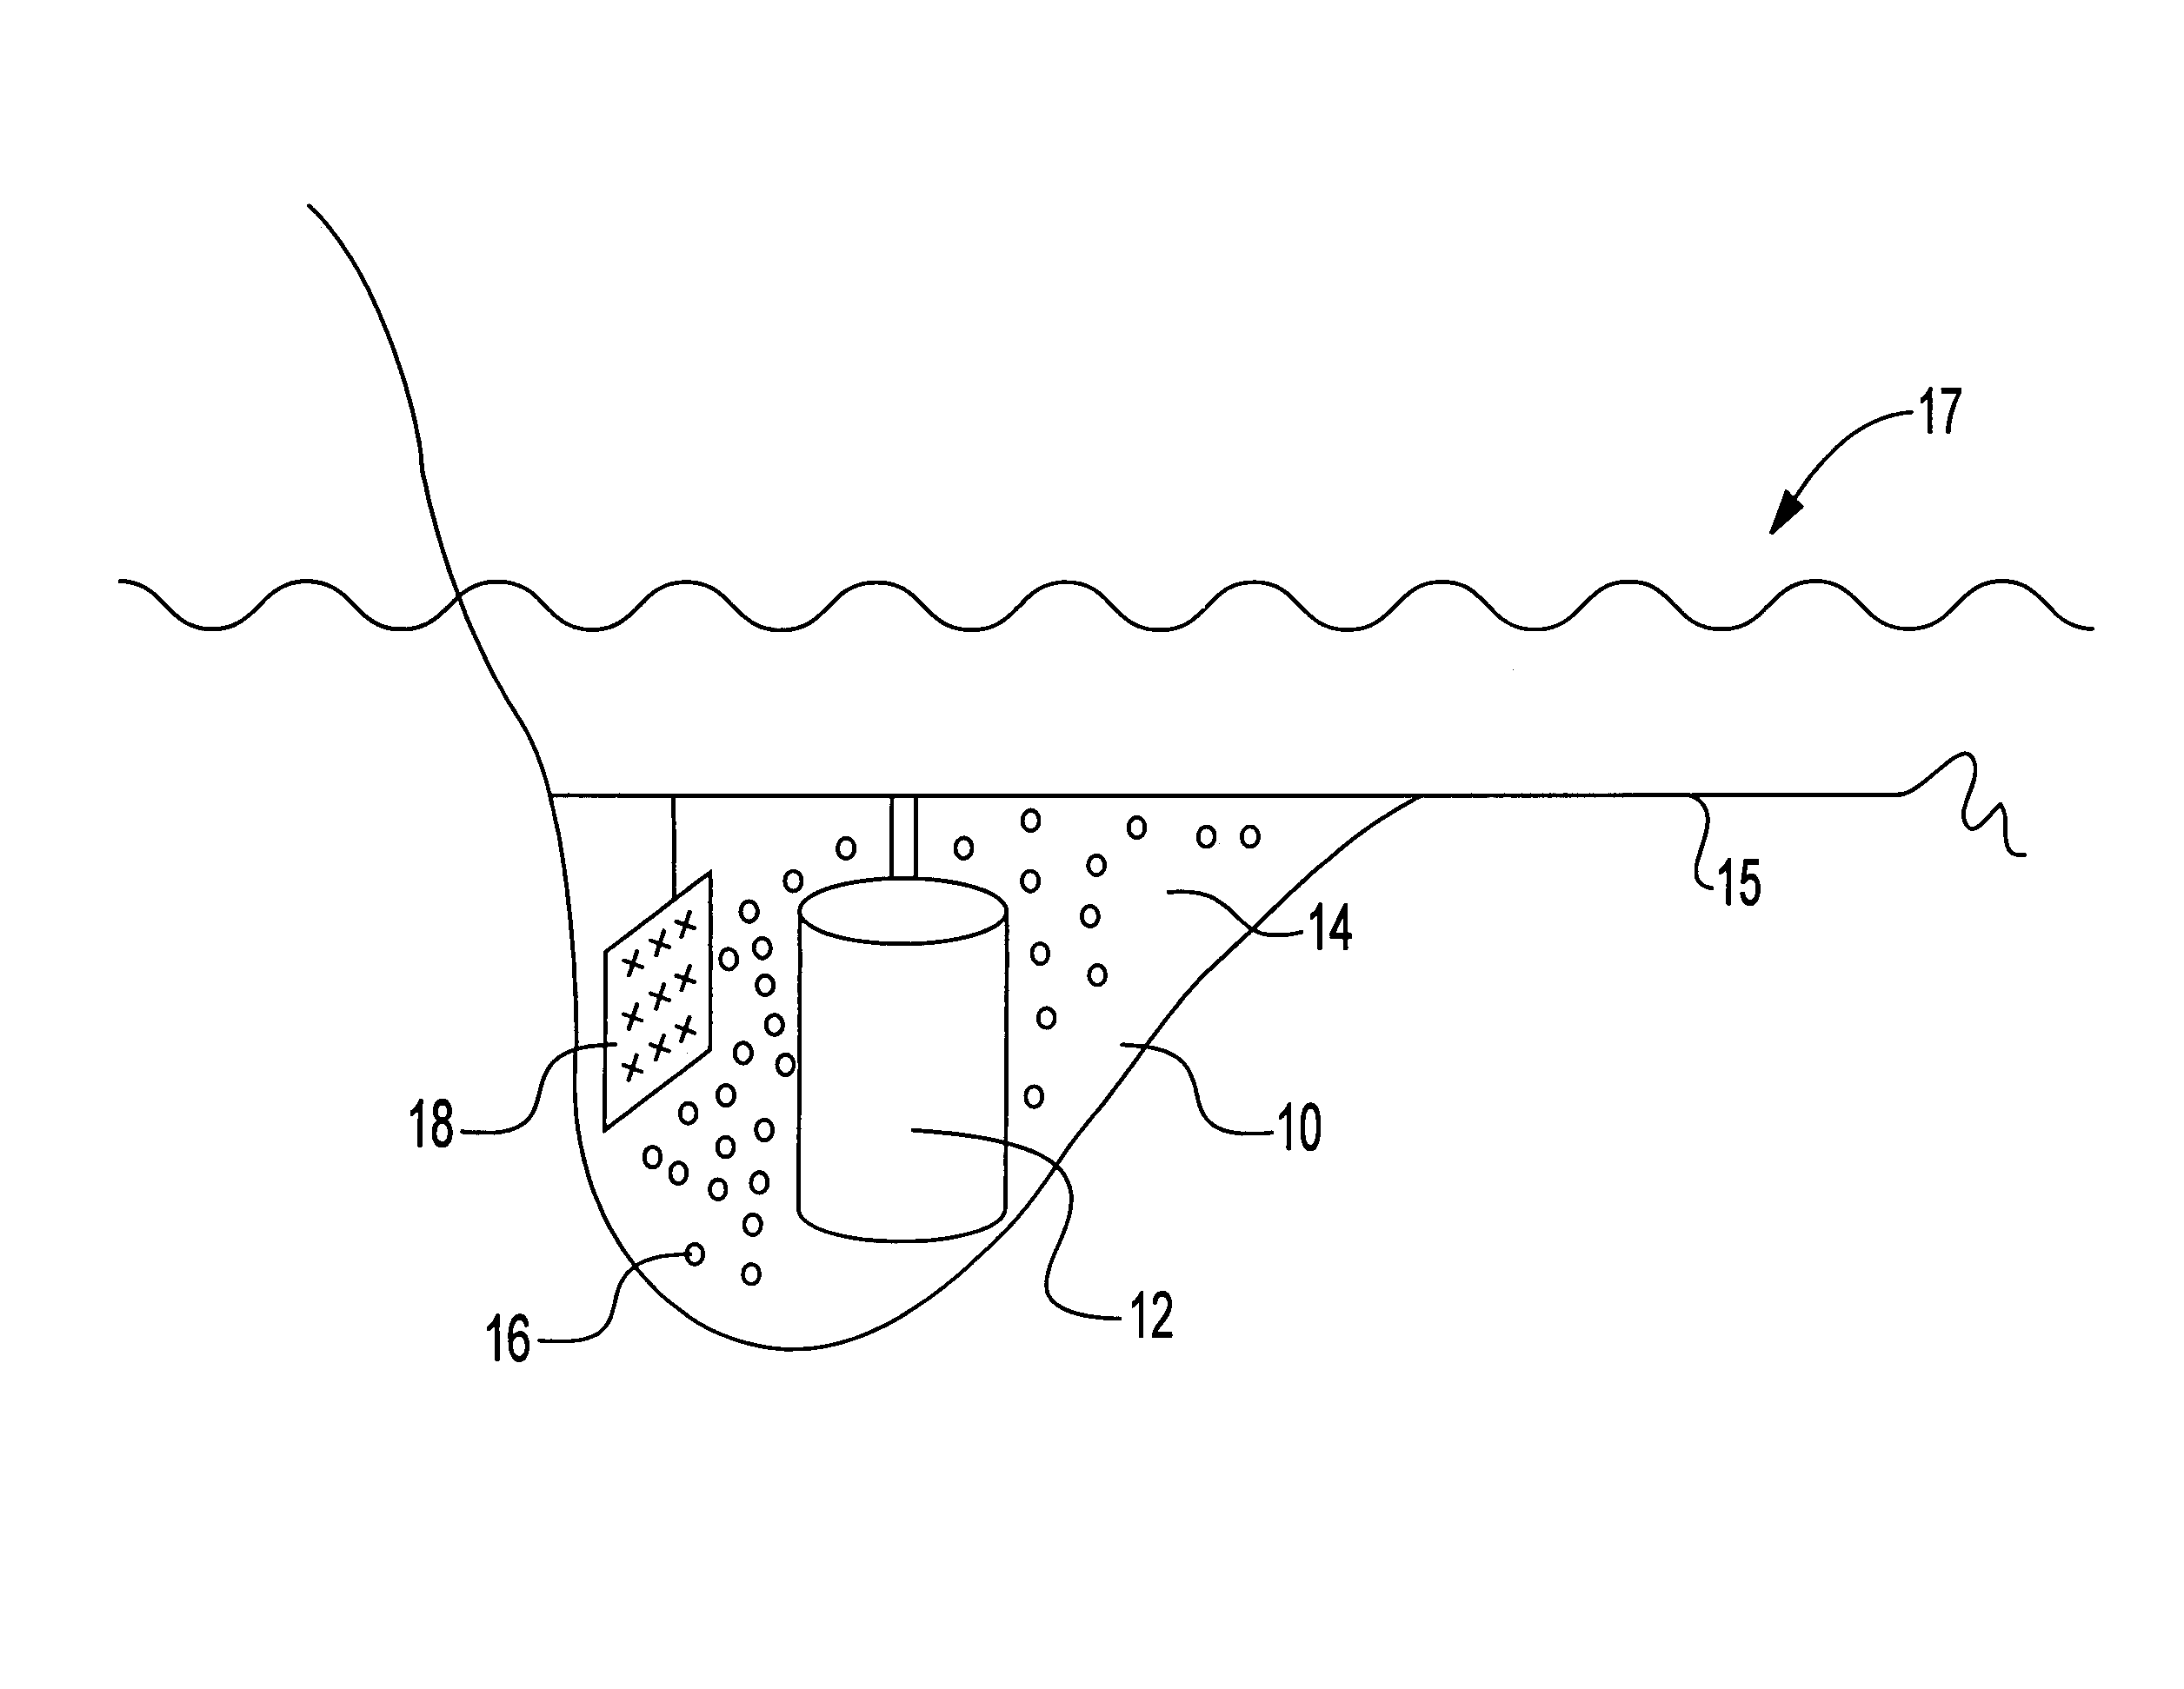 Increased effective aperture for receive arrays